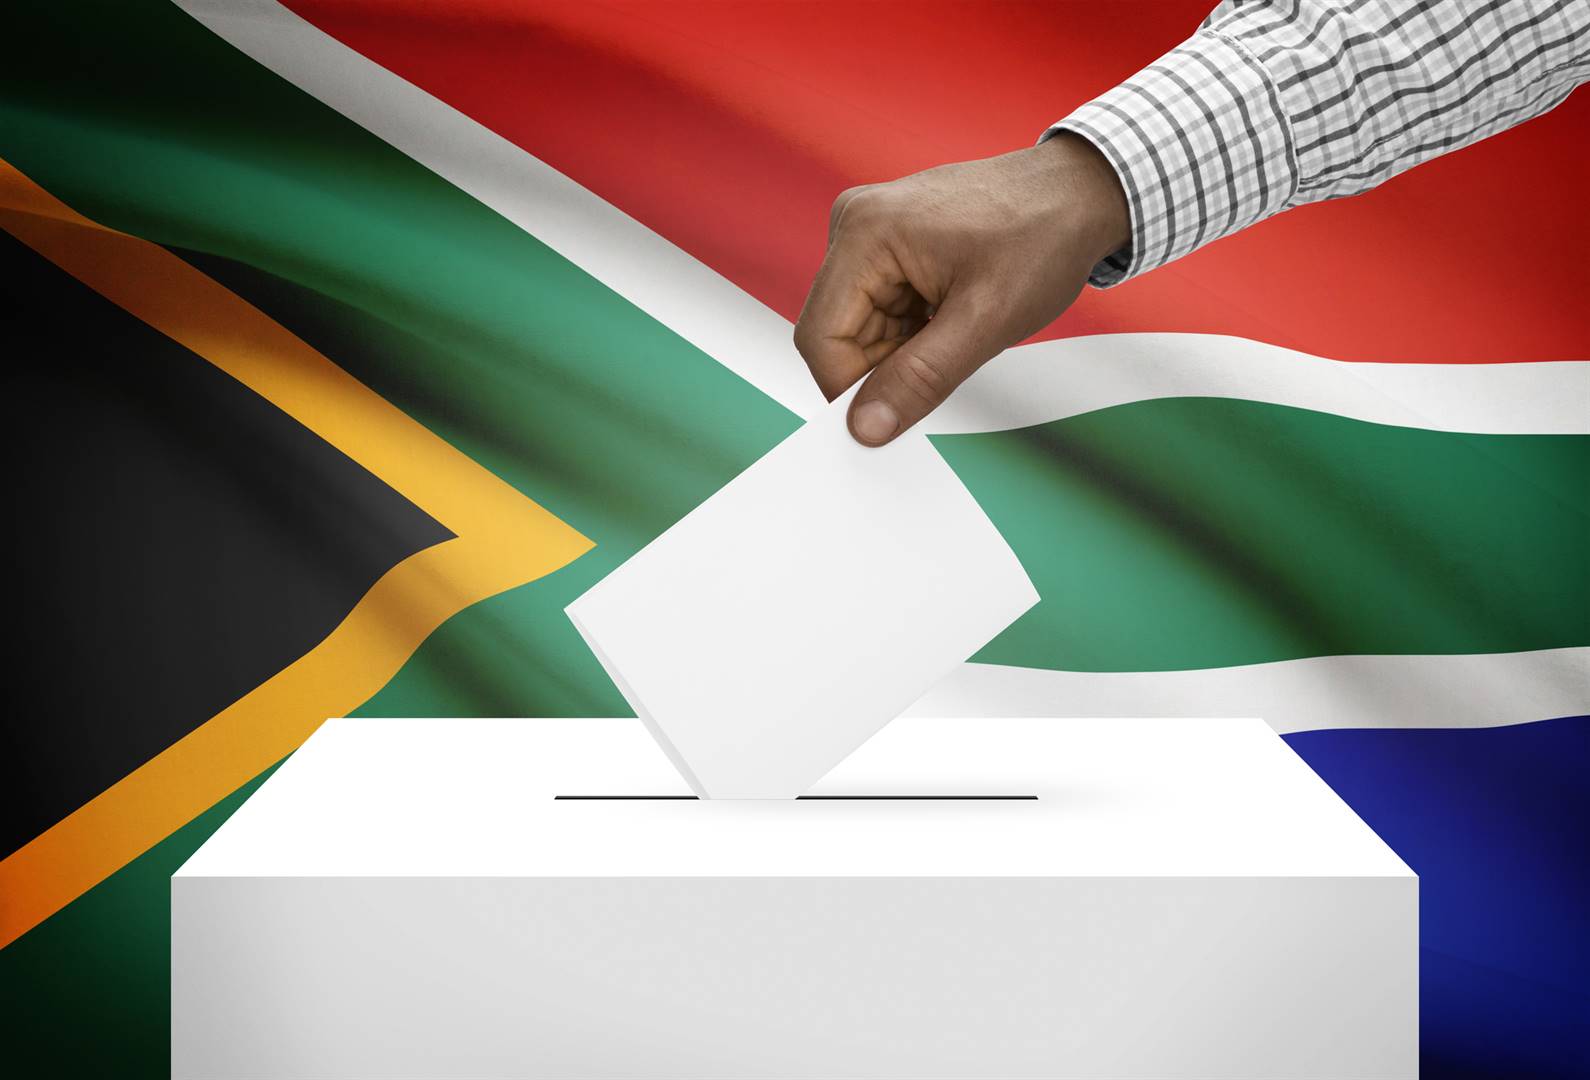 Choose wisely on 29 May, whether voting at national or provincial levels, or for an independent candidate. 